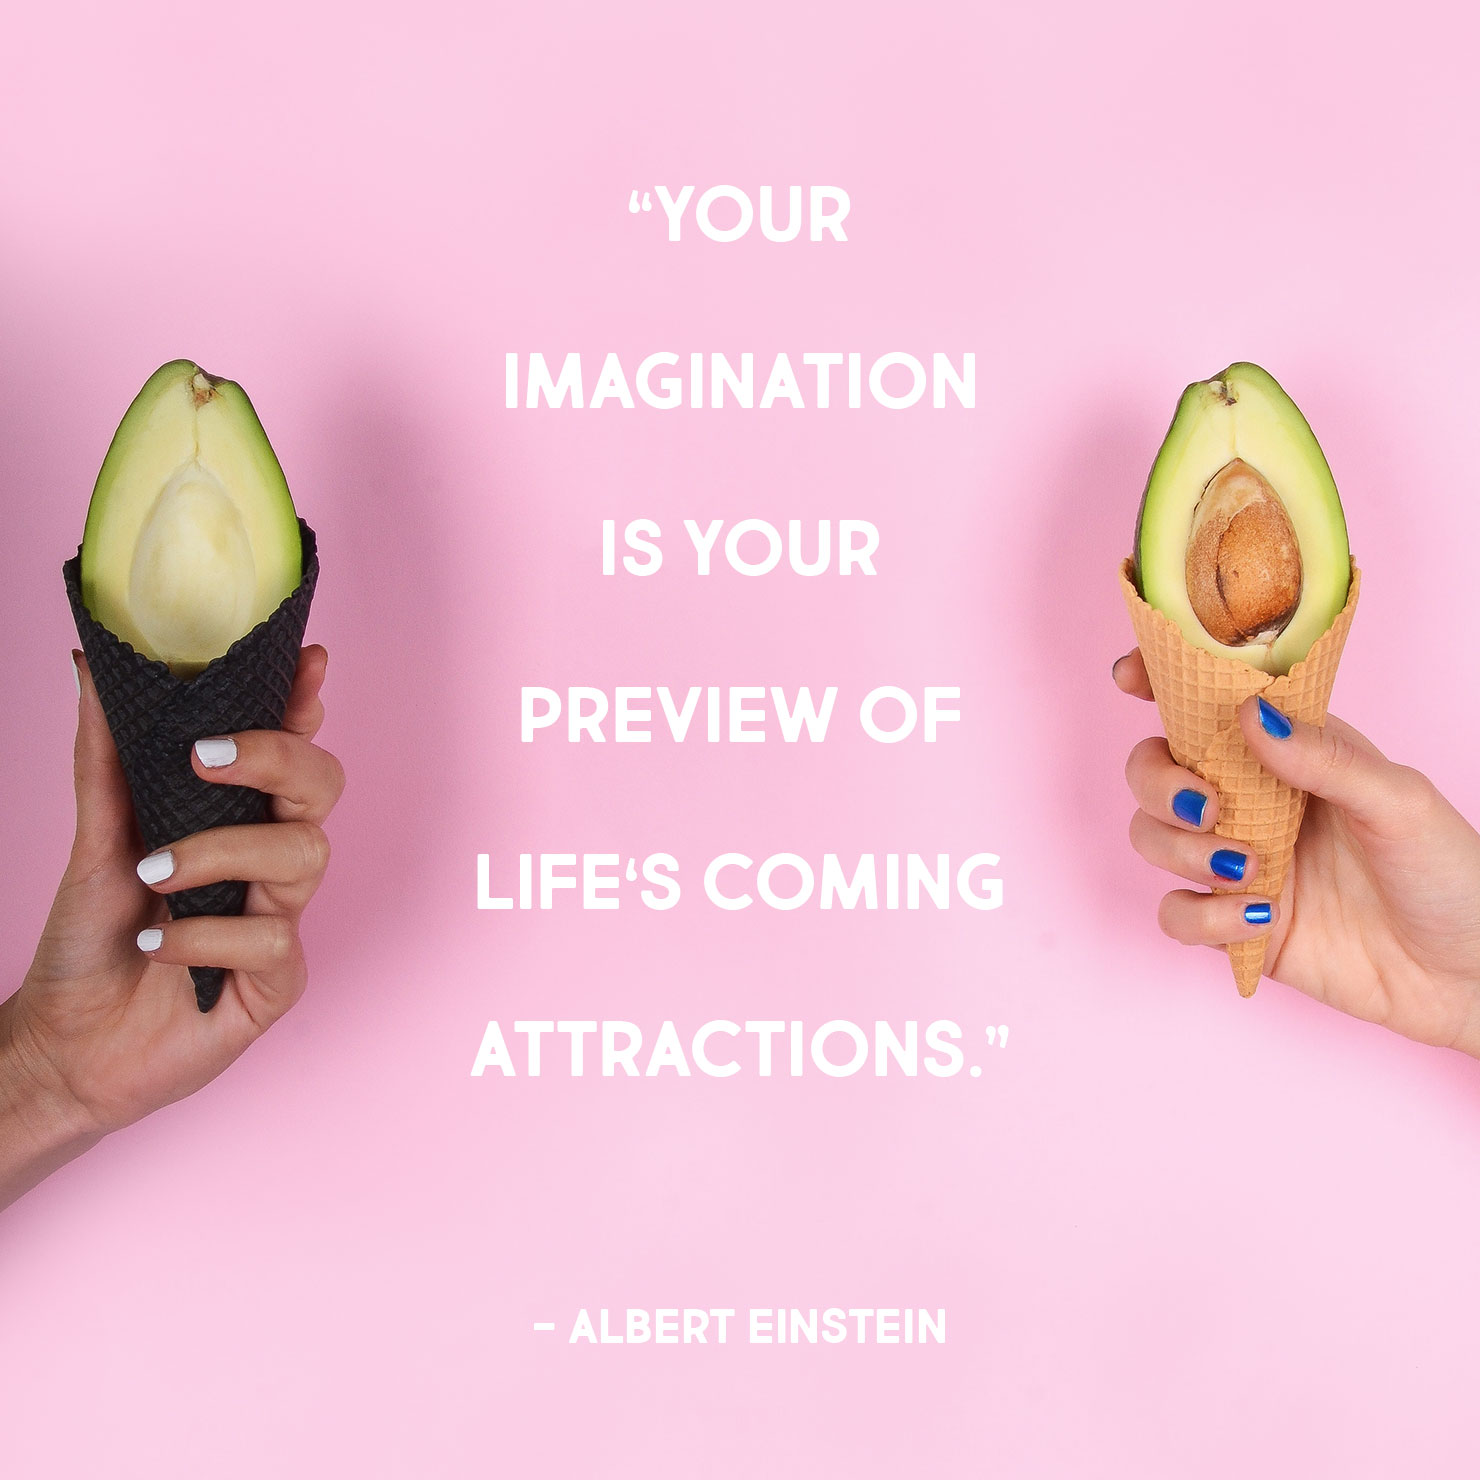 high school graduation quote: your imagination is your preview of life's coming attractions - albert einstein